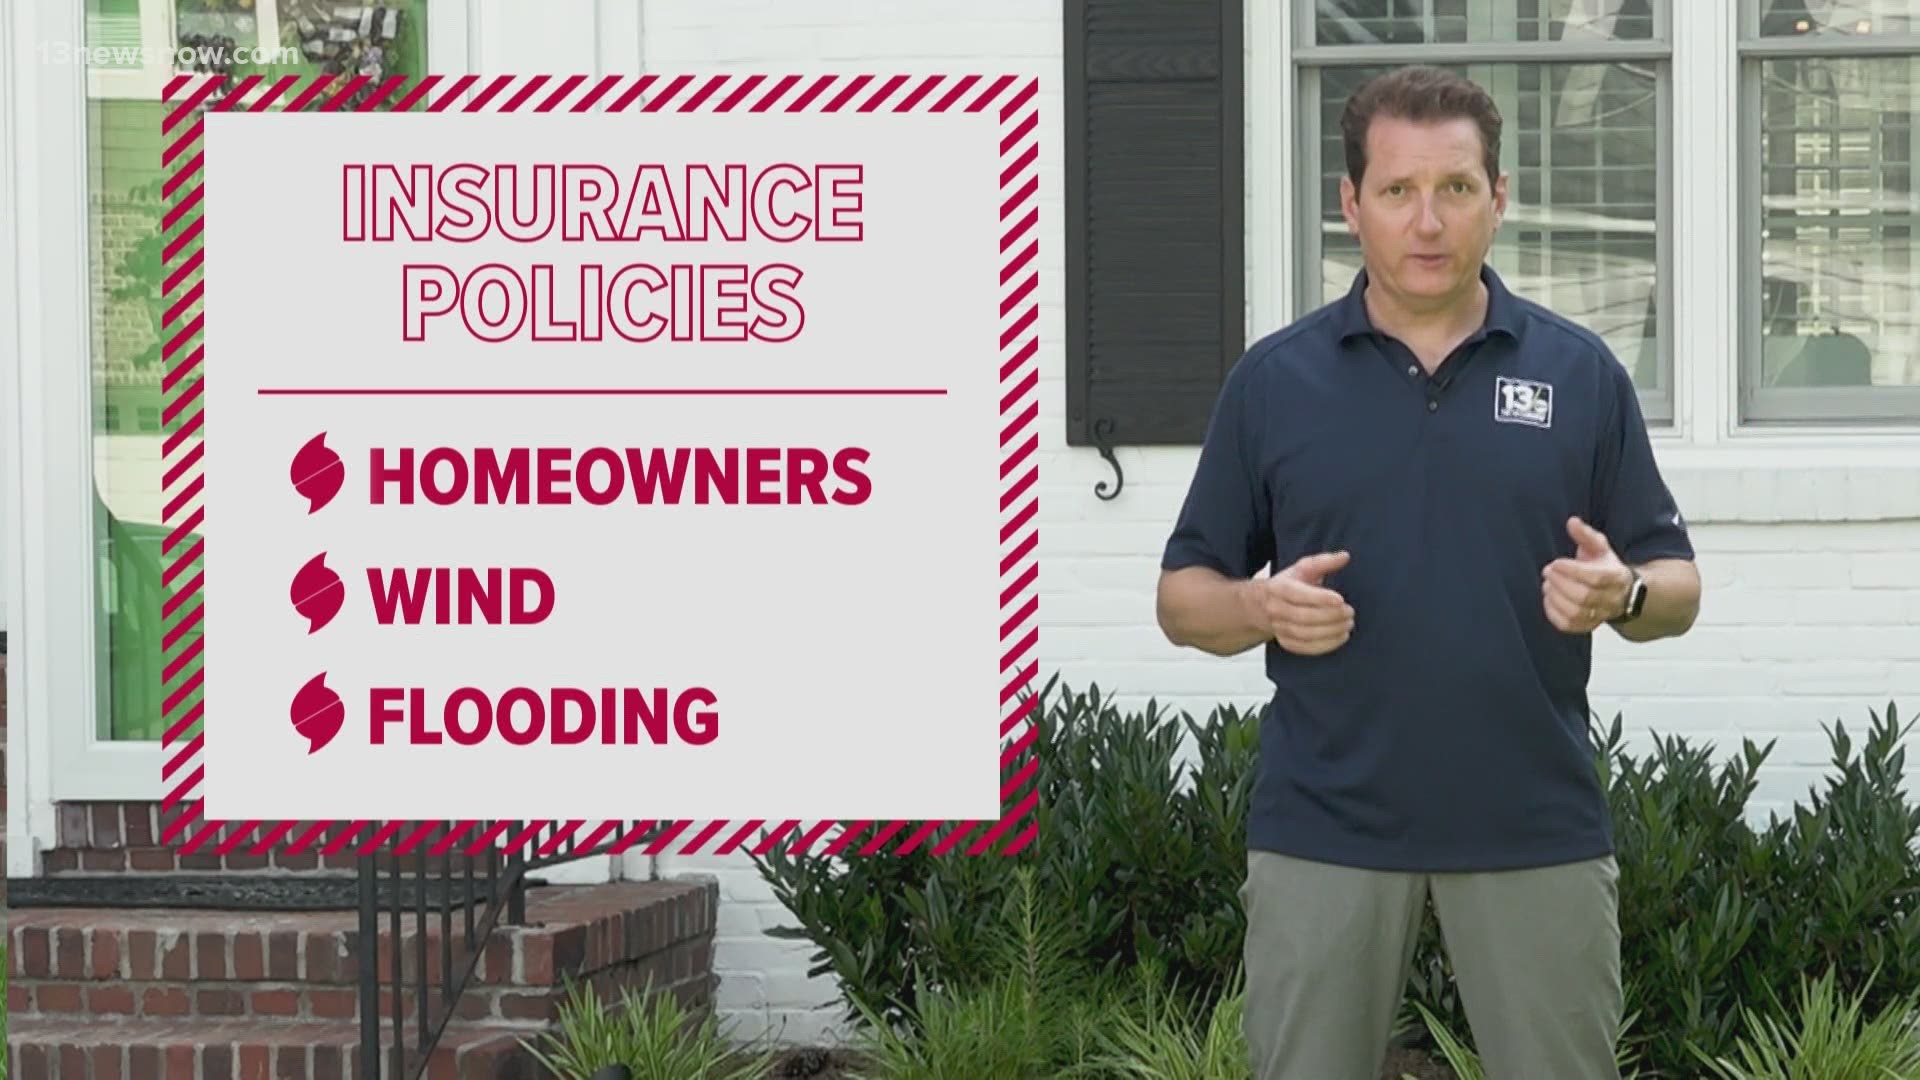 13News Now Meteorologist Craig Moeller shares important information about insurance coverage that could help you during hurricane season.